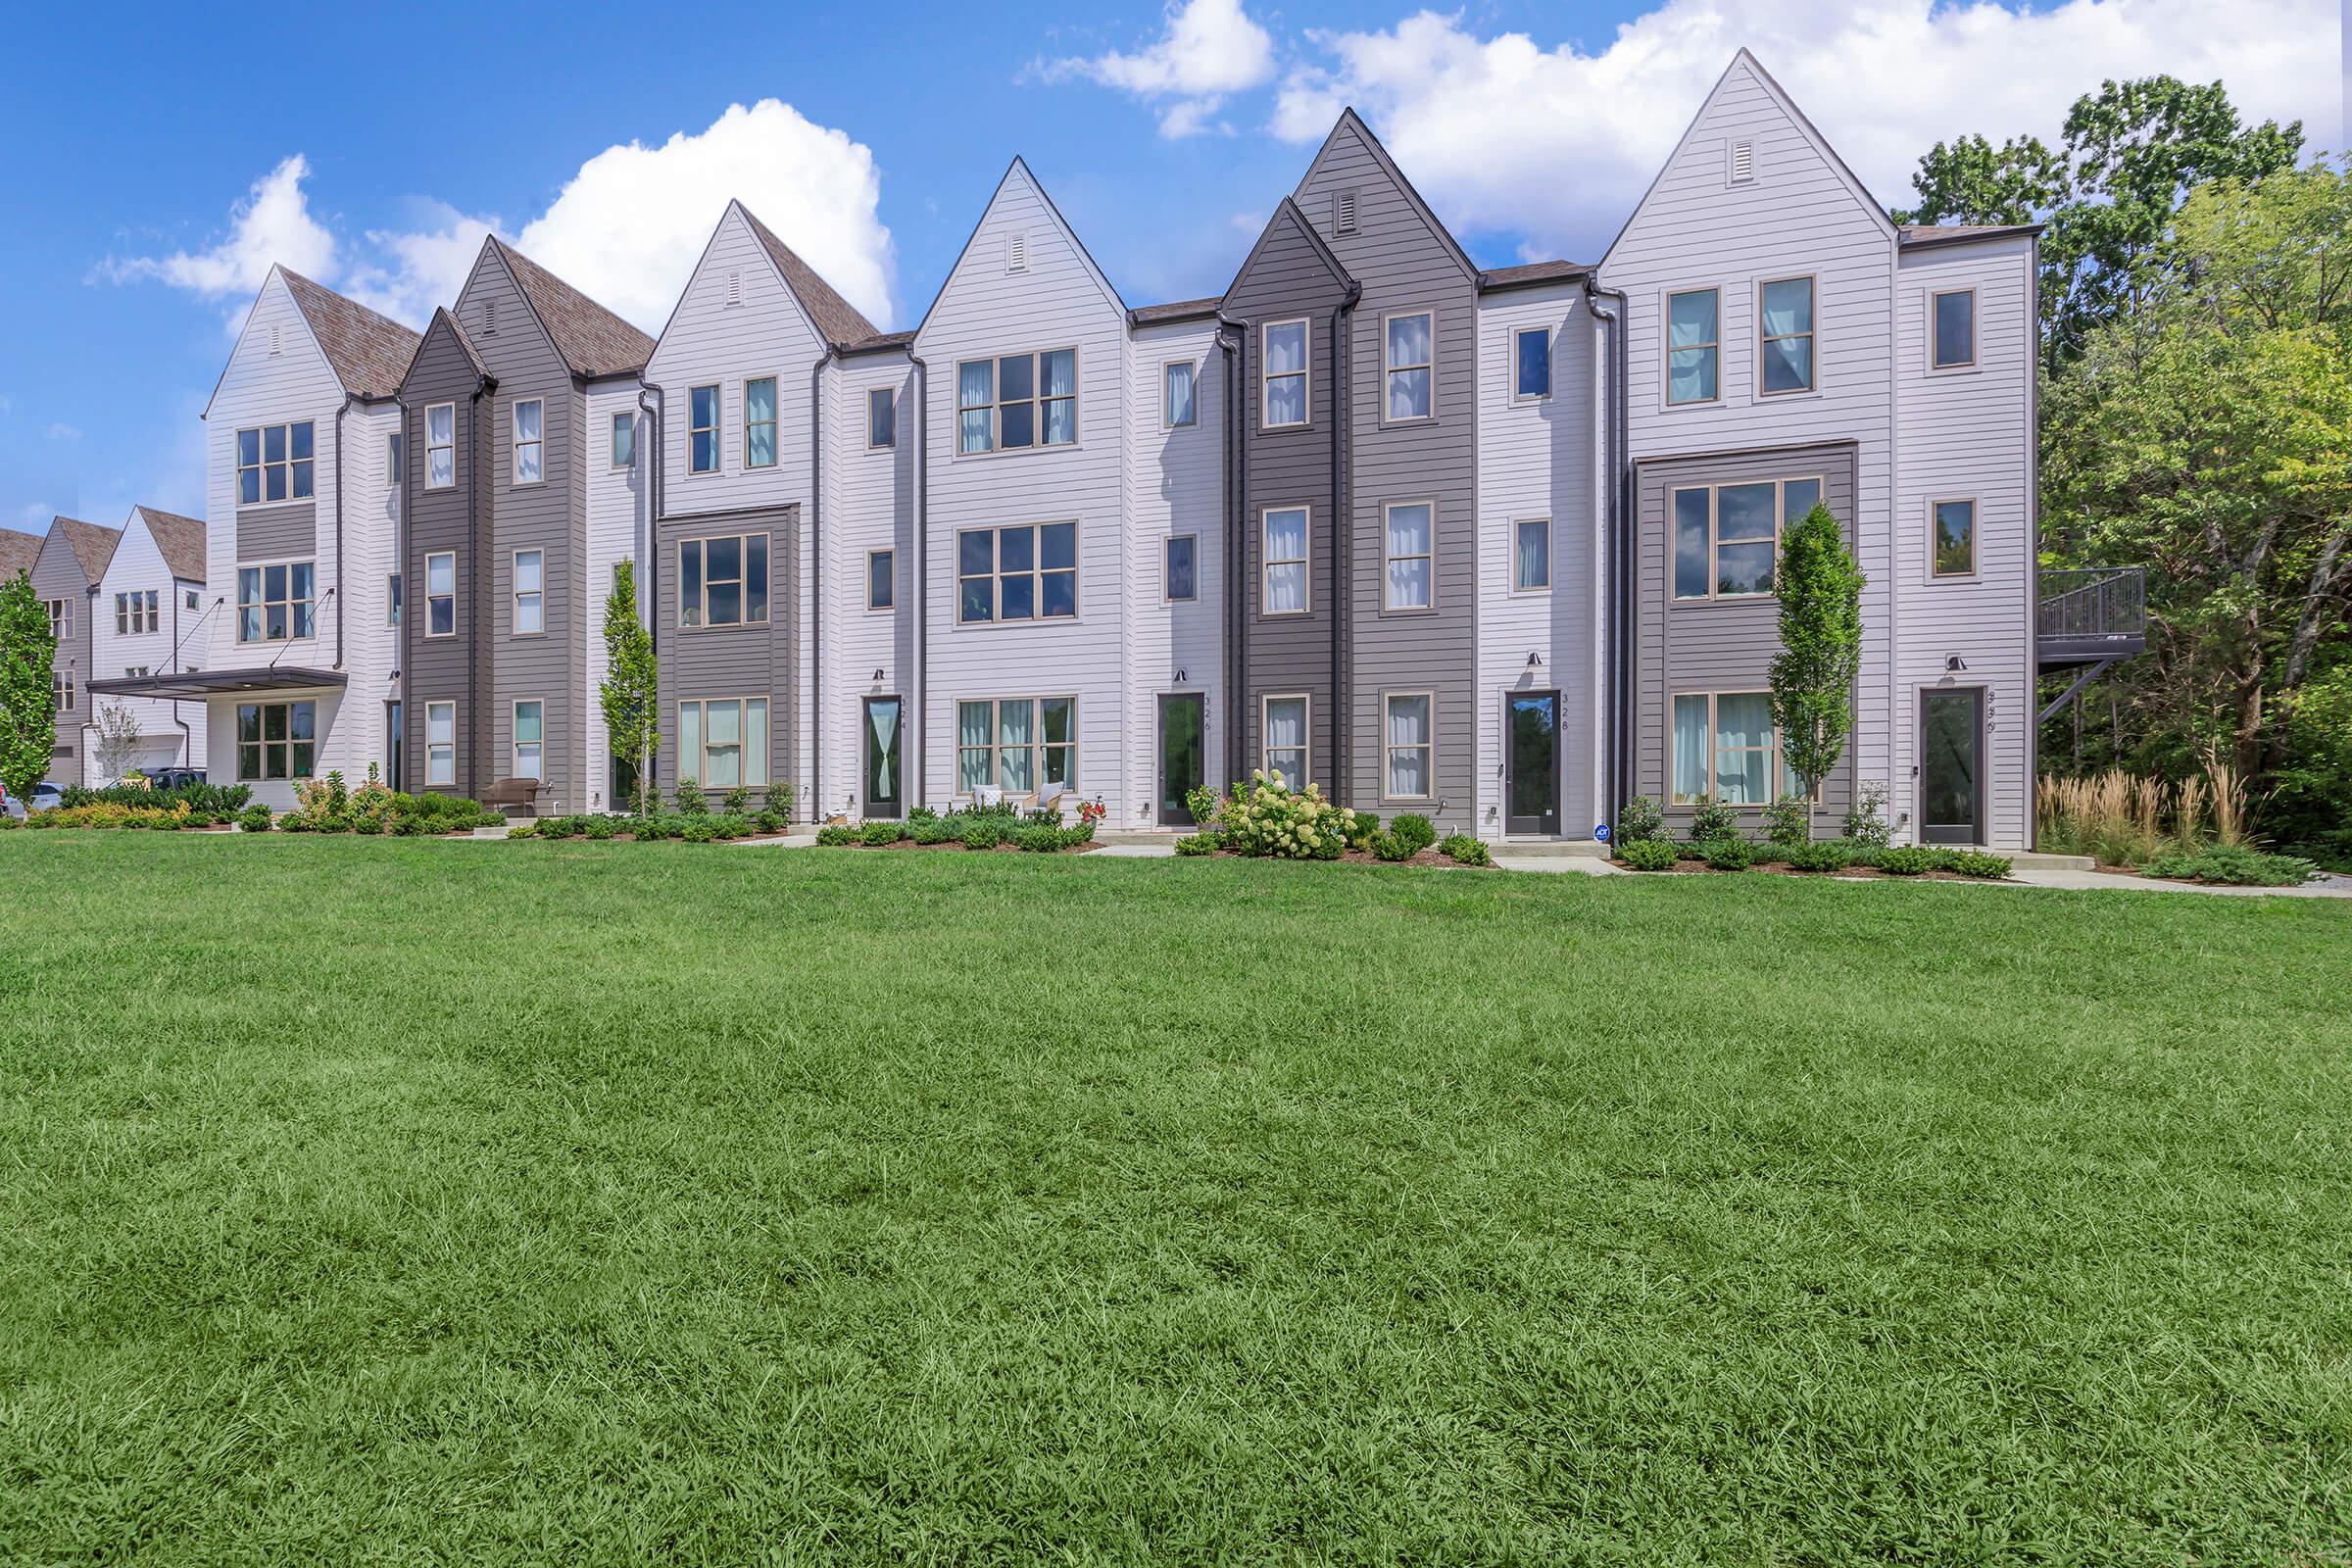 Exterior view of two and three bedroom townhomes at East End Village